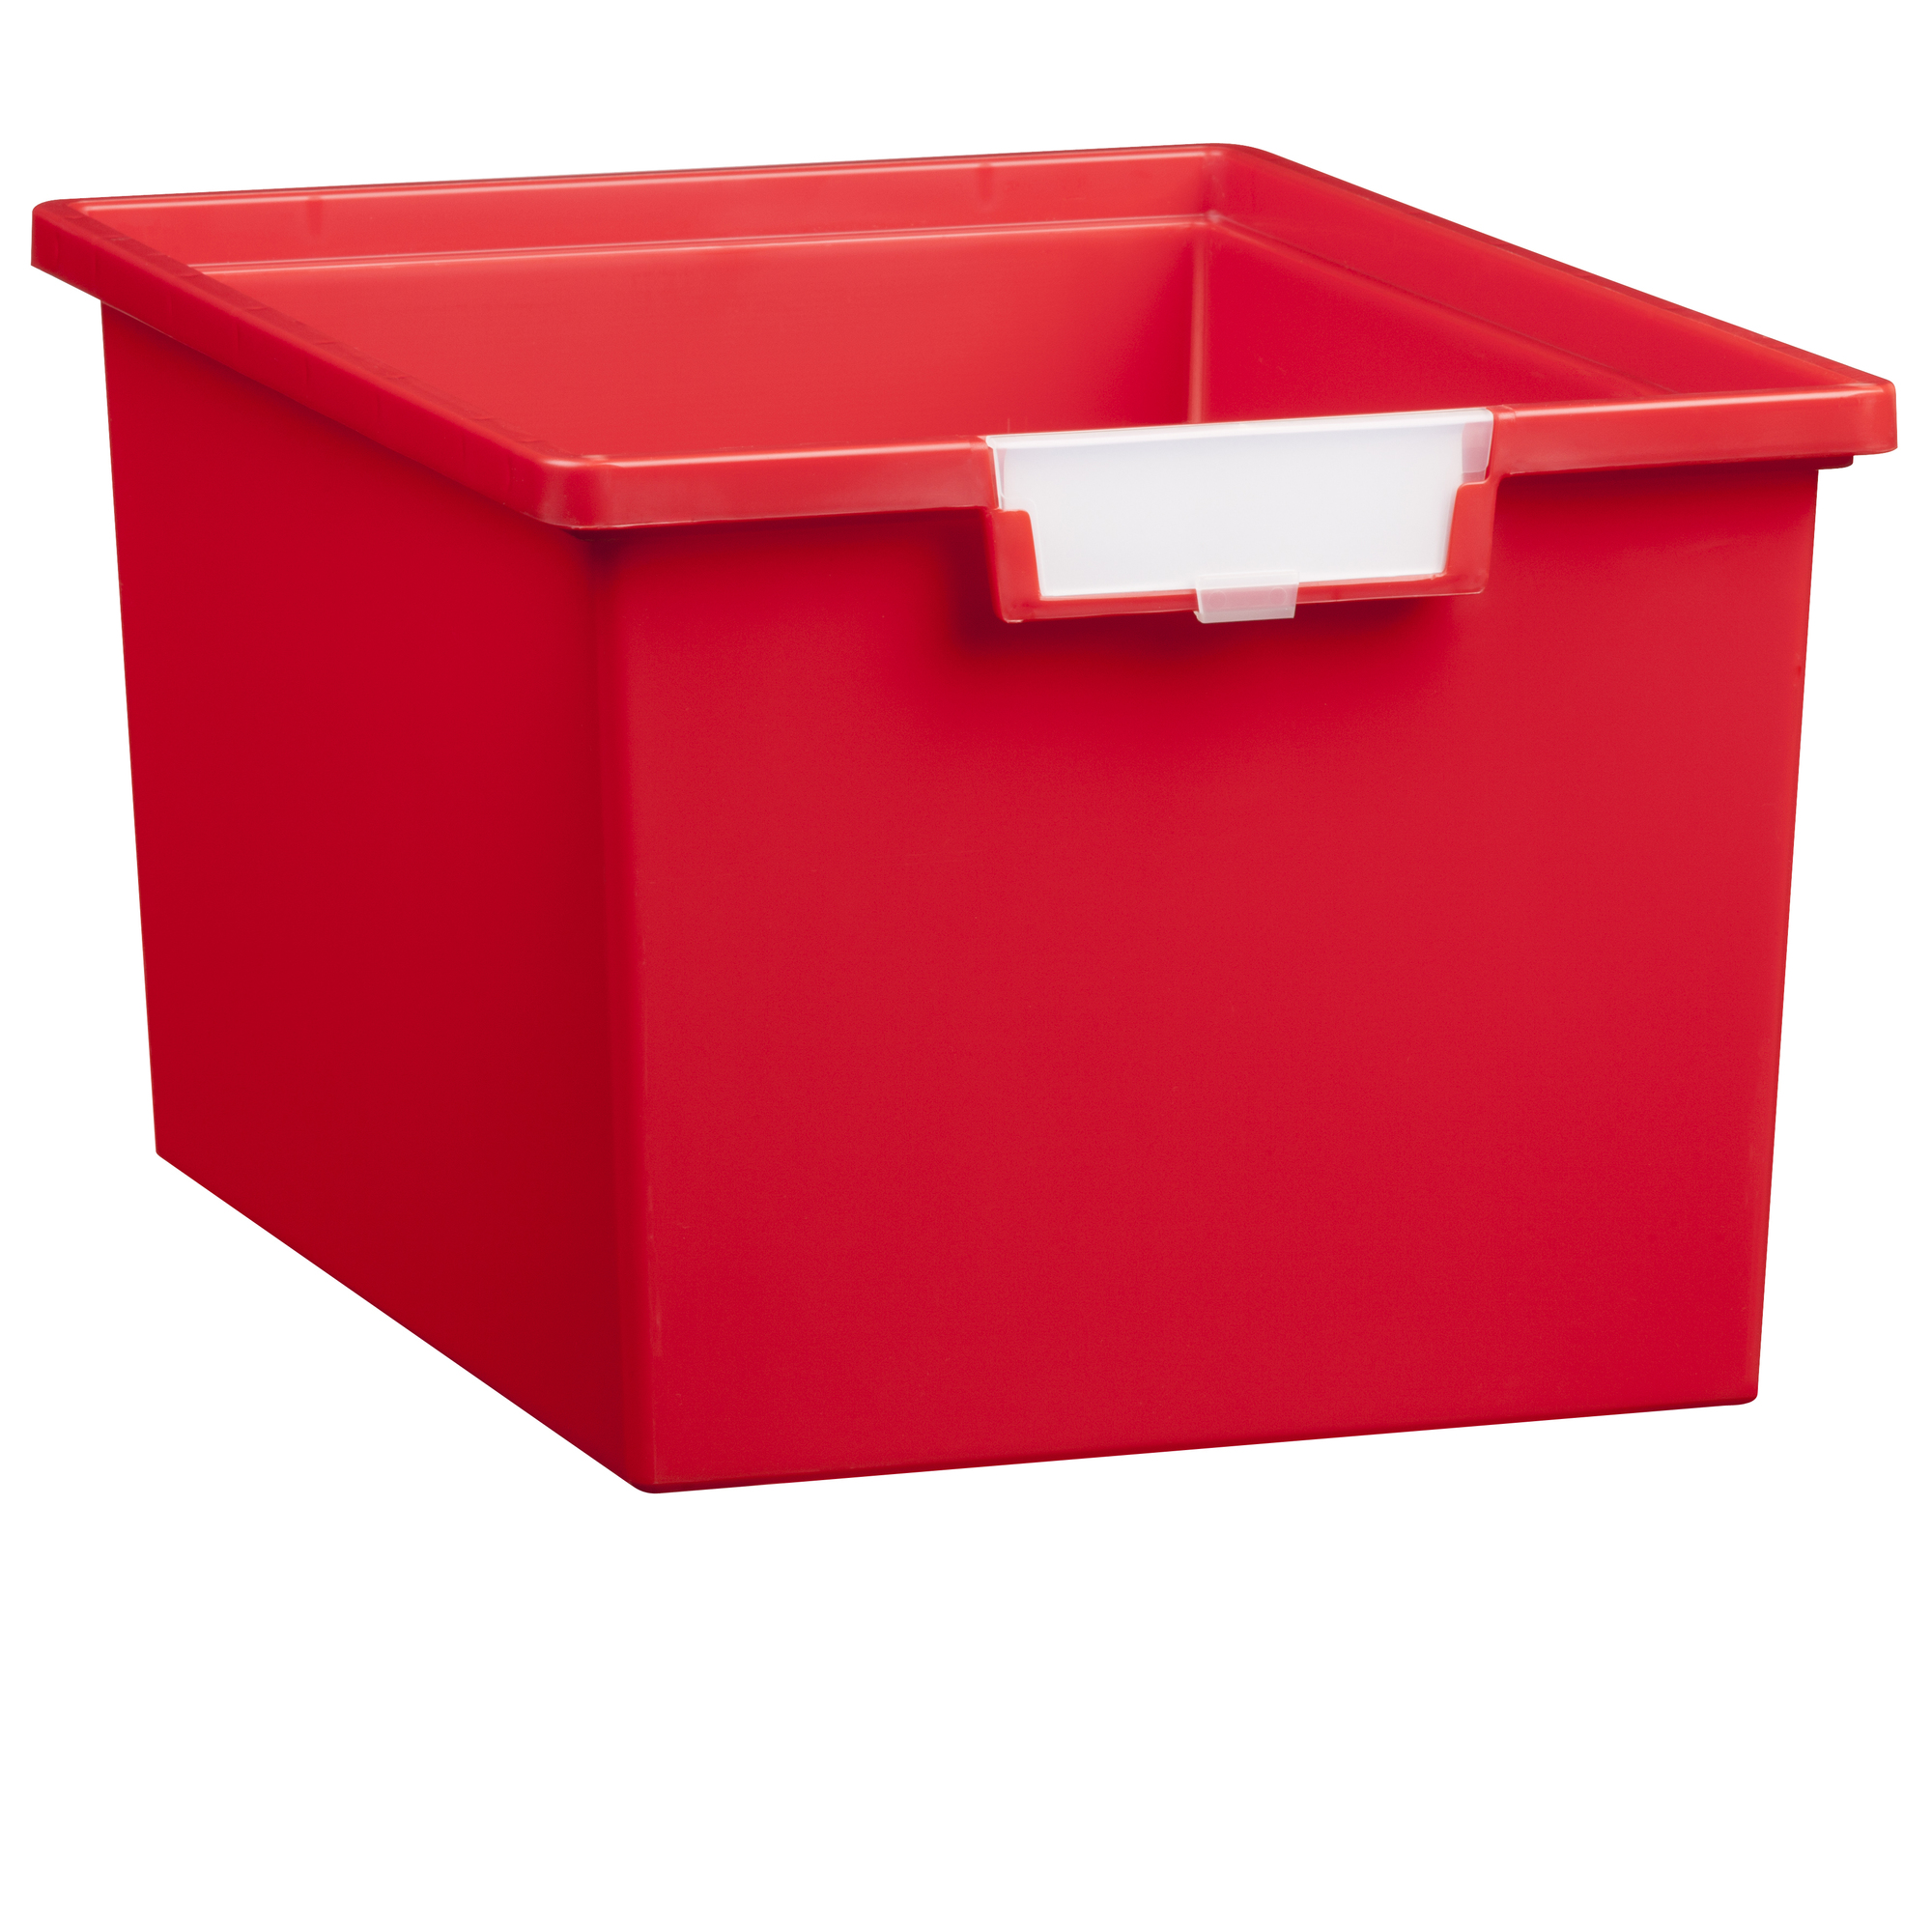 Certwood StorWerks, Slim Line 9Inch Tray in Primary Red-3PK, Included (qty.) 3 Height 9 in, Model CE1953PR3